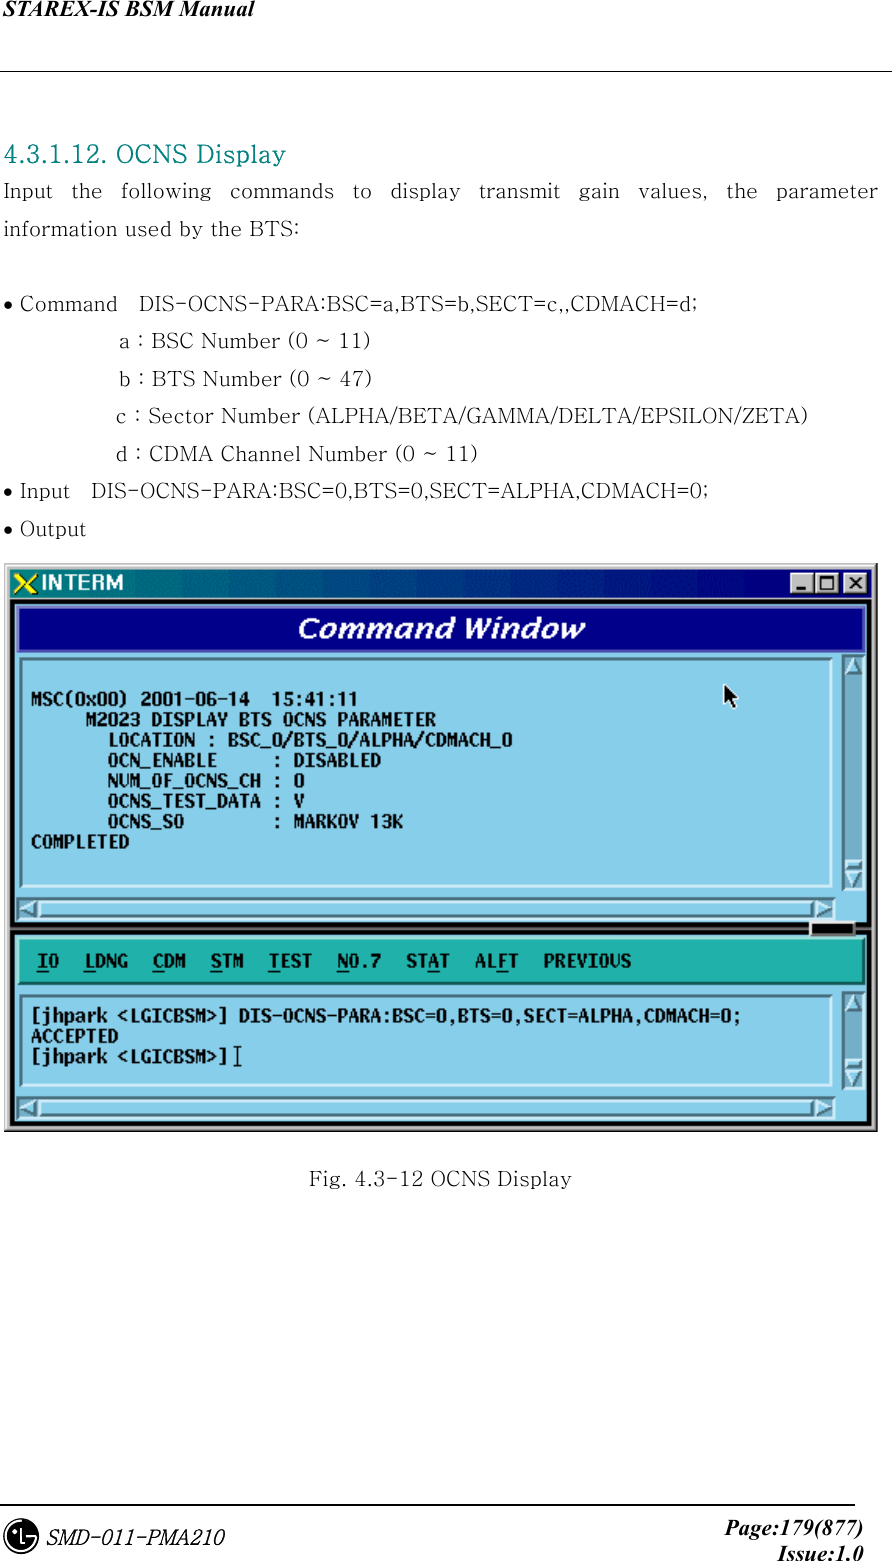 STAREX-IS BSM Manual     Page:179(877)Issue:1.0SMD-011-PMA210  4.3.1.12. OCNS Display Input the following commands to display transmit gain values, the  parameter information used by the BTS:  • Command    DIS-OCNS-PARA:BSC=a,BTS=b,SECT=c,,CDMACH=d;            a : BSC Number (0 ~ 11)            b : BTS Number (0 ~ 47) c : Sector Number (ALPHA/BETA/GAMMA/DELTA/EPSILON/ZETA) d : CDMA Channel Number (0 ~ 11) • Input    DIS-OCNS-PARA:BSC=0,BTS=0,SECT=ALPHA,CDMACH=0; • Output  Fig. 4.3-12 OCNS Display 